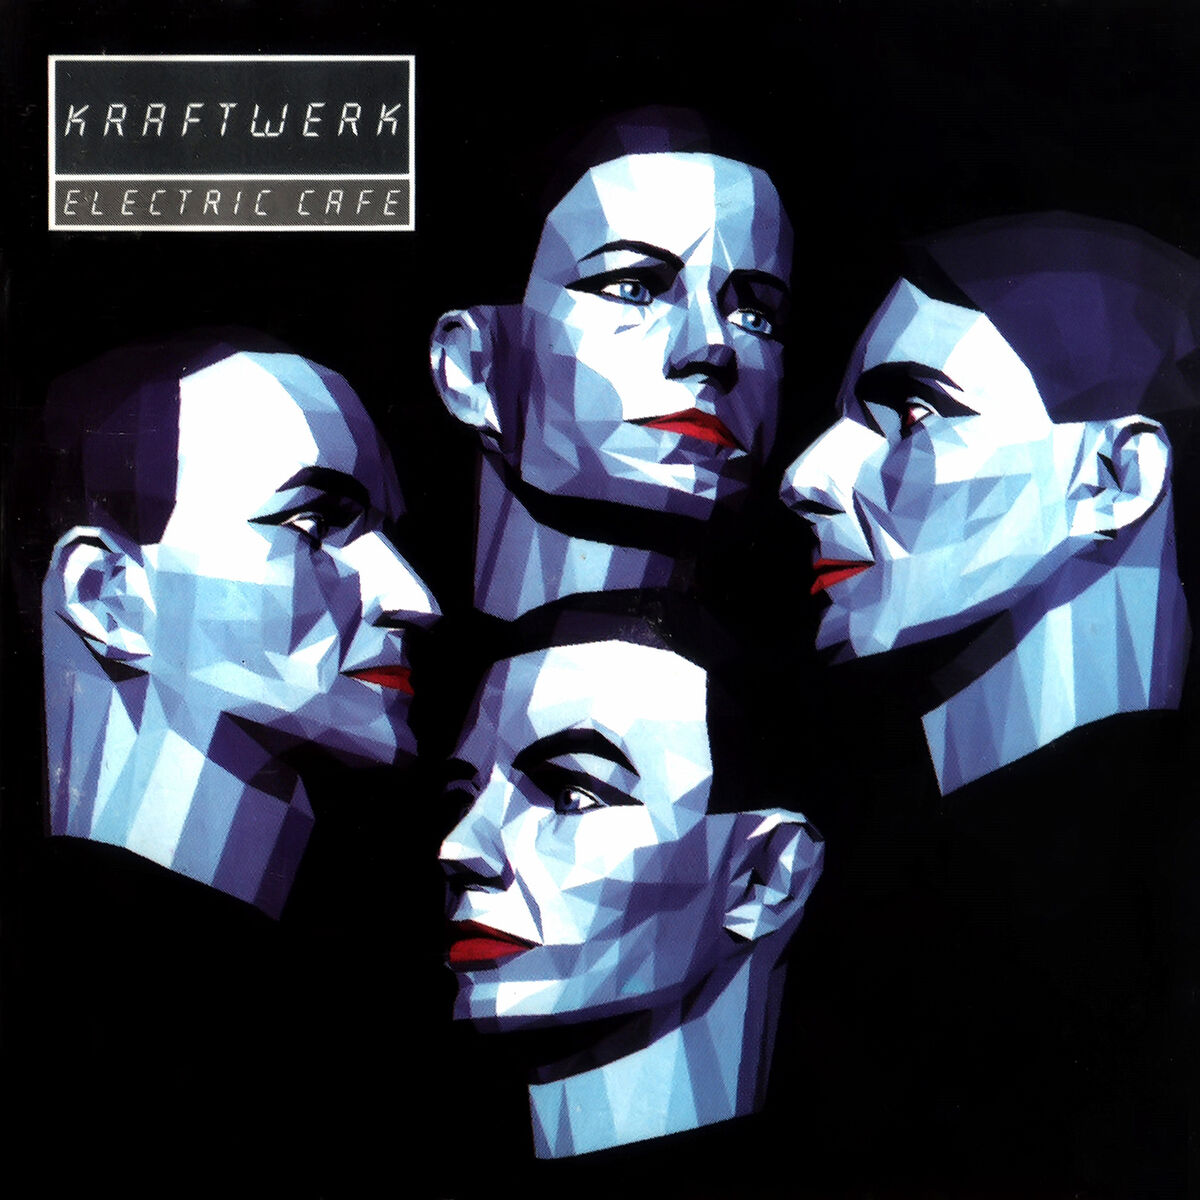 https://static.wikia.nocookie.net/kraftwerk/images/b/b7/Electric_Caf%C3%A9_artwork.jpg/revision/latest/scale-to-width-down/1200?cb=20130601090041